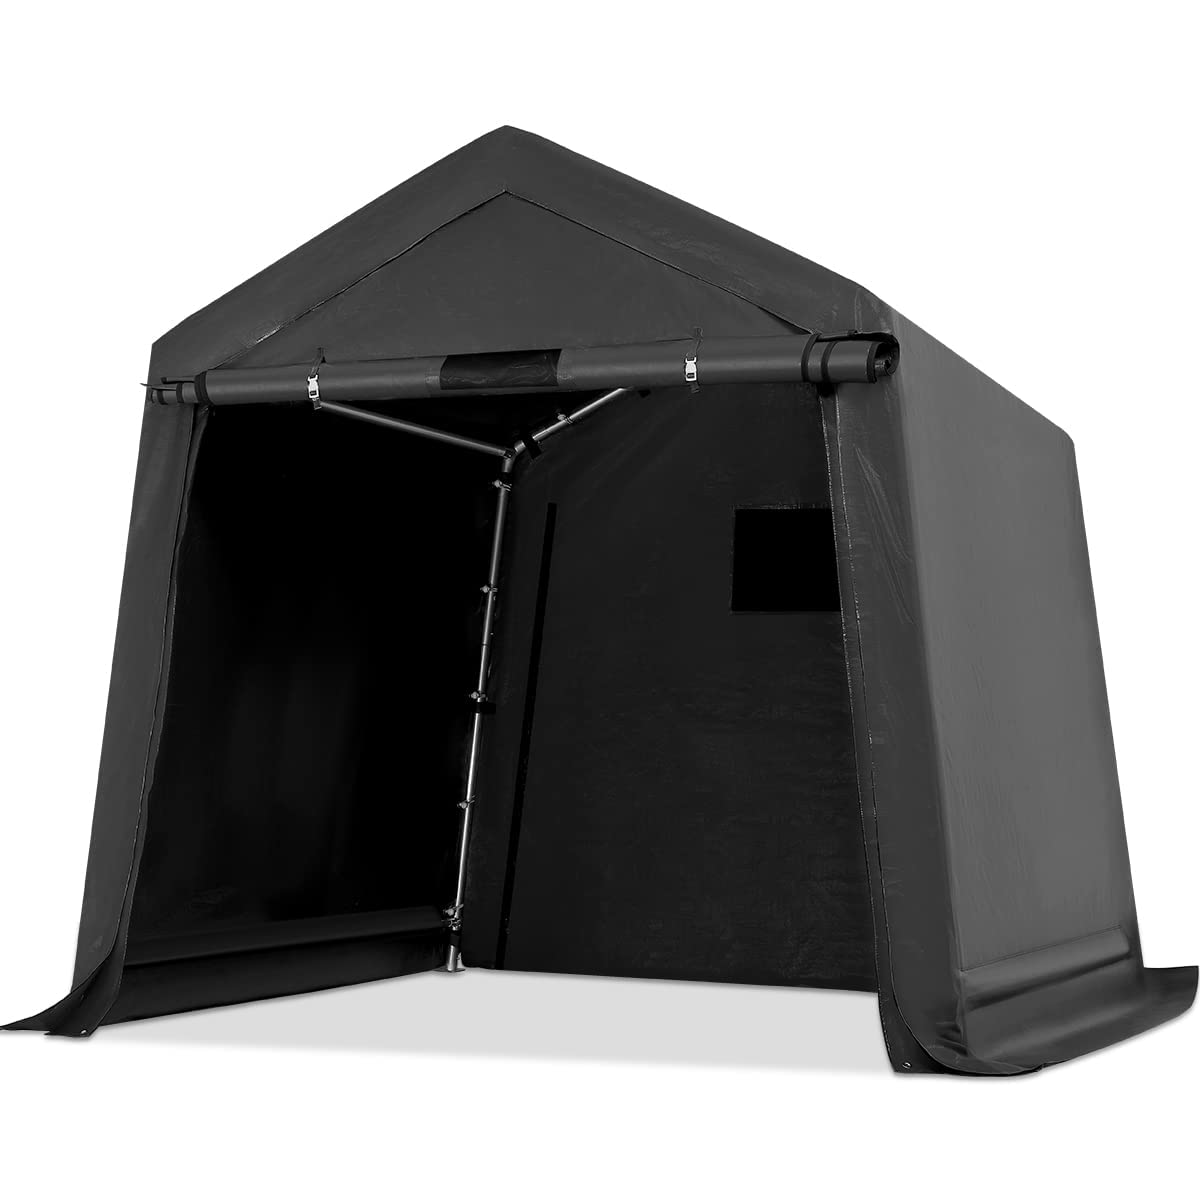 ADVANCE OUTDOOR 10X20 ft Carport Heavy Duty Outdoor Patio Anti-Snow Portable Canopy Storage Shelter Shed with 2 Rolled up Zipper Doors & Vents for